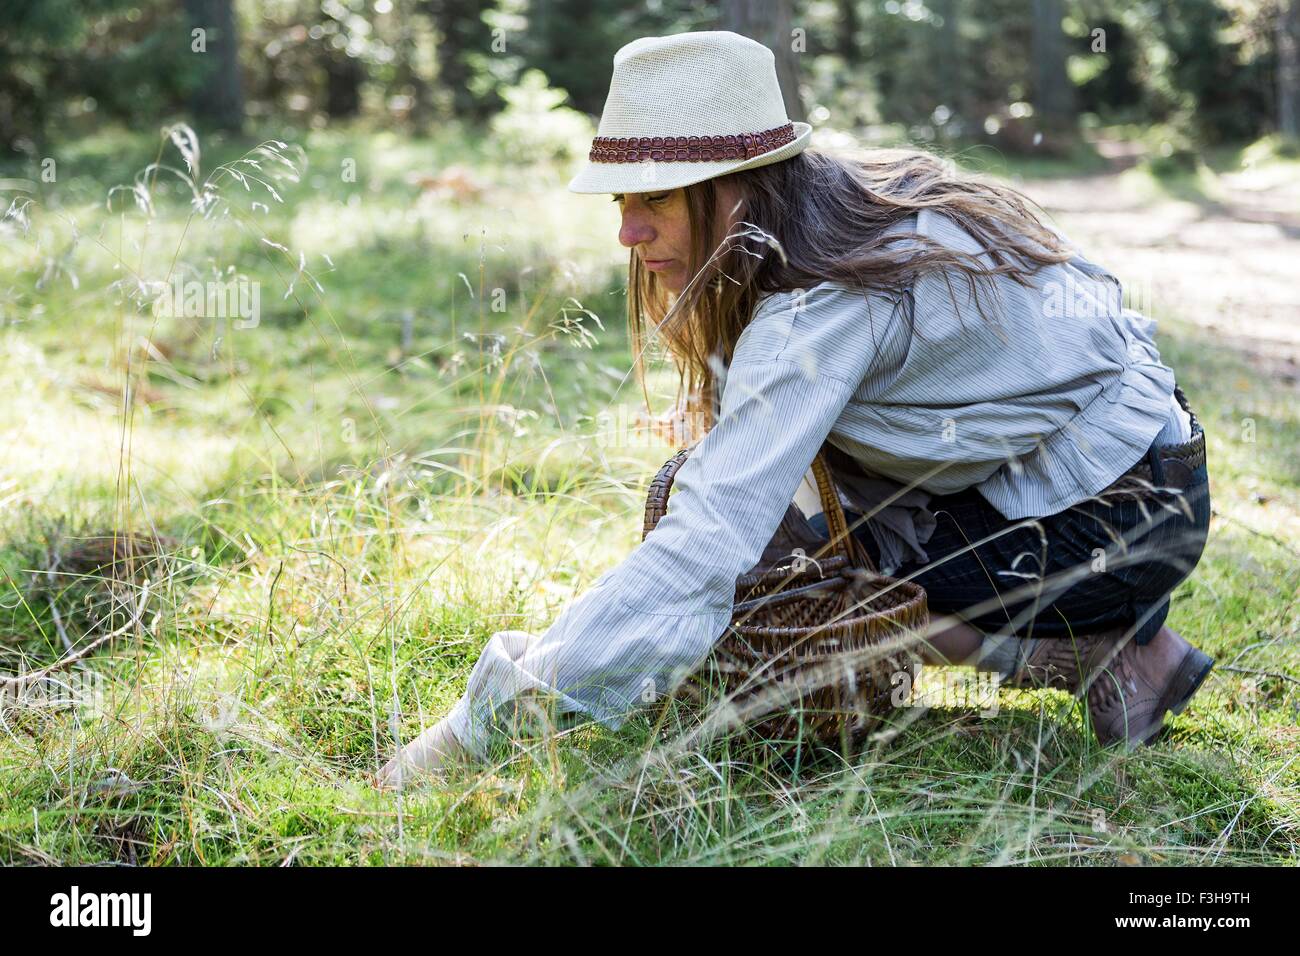 Mature woman foraging for mushrooms in forest Stock Photo